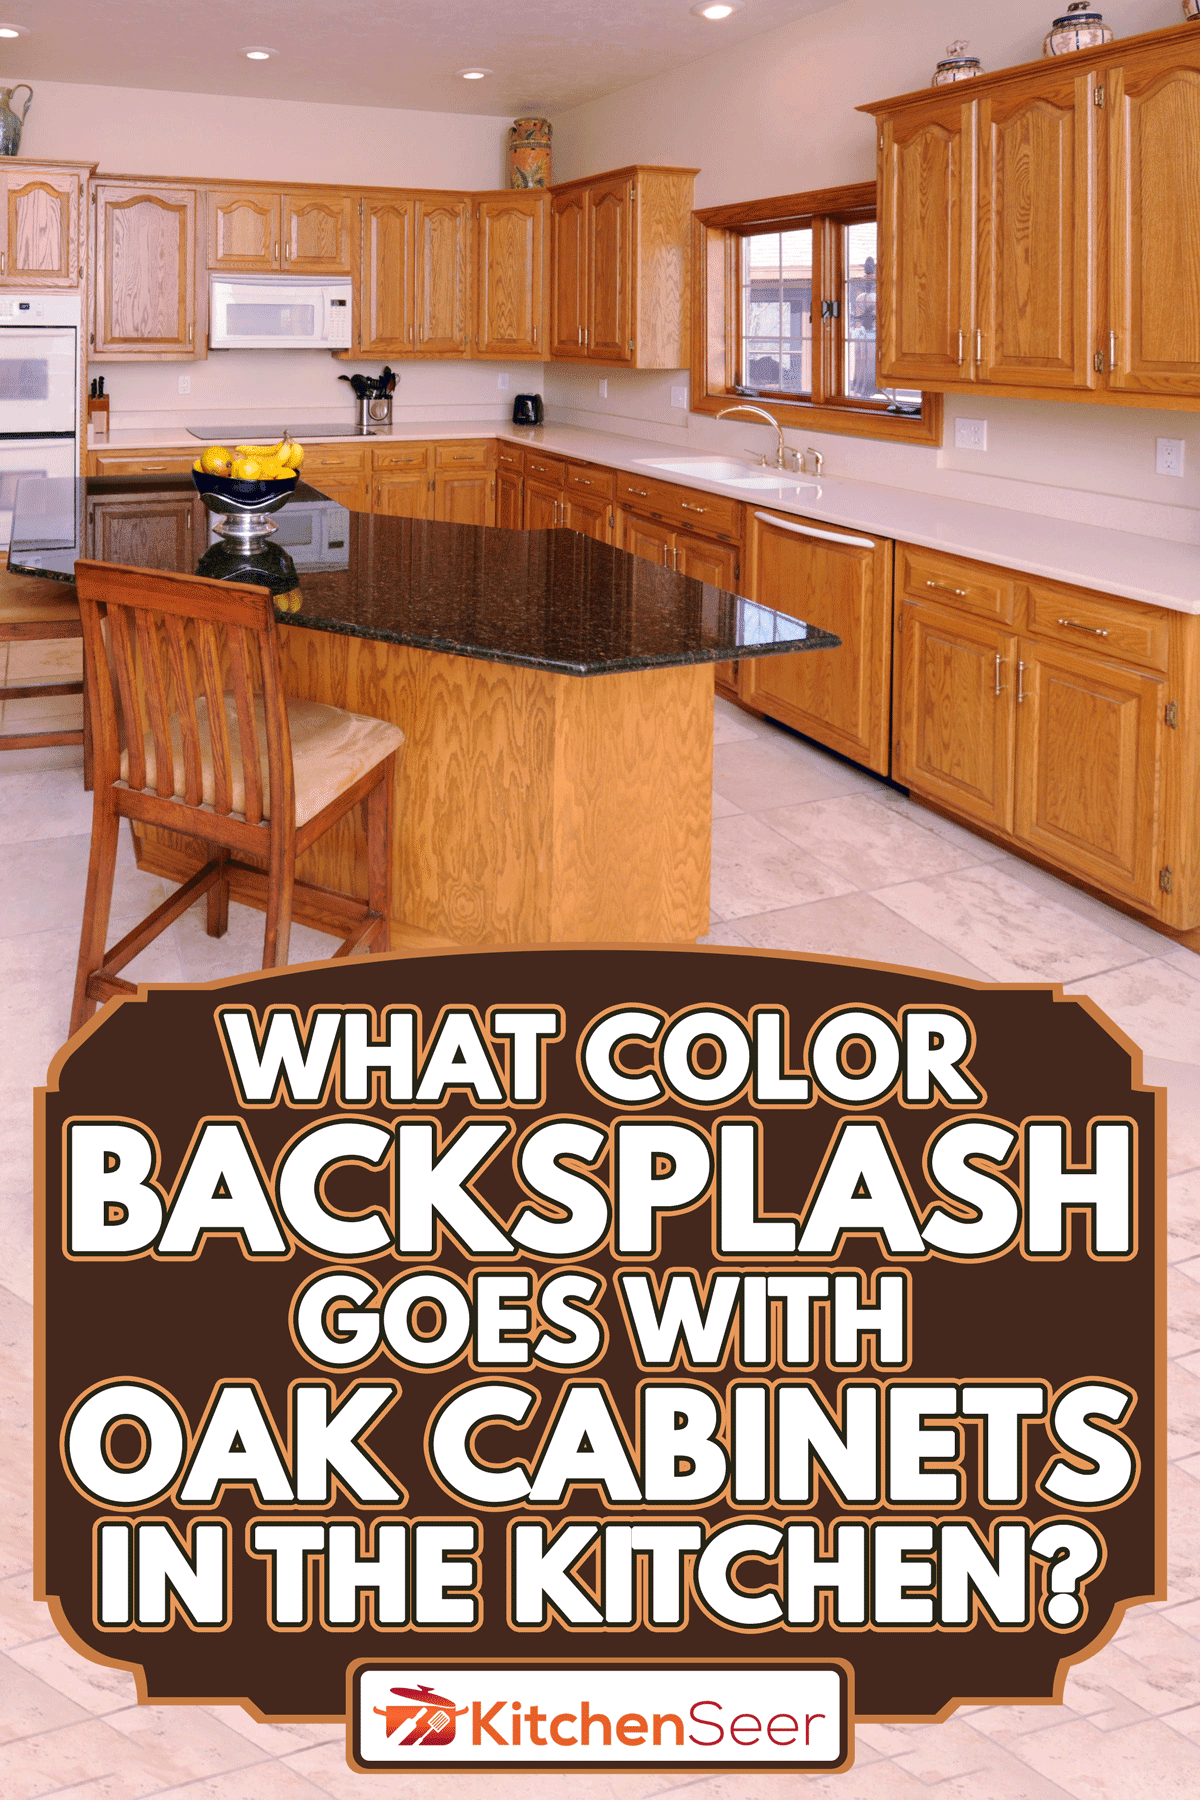 What Color Backsplash Goes With Oak Cabinets In The Kitchen ...